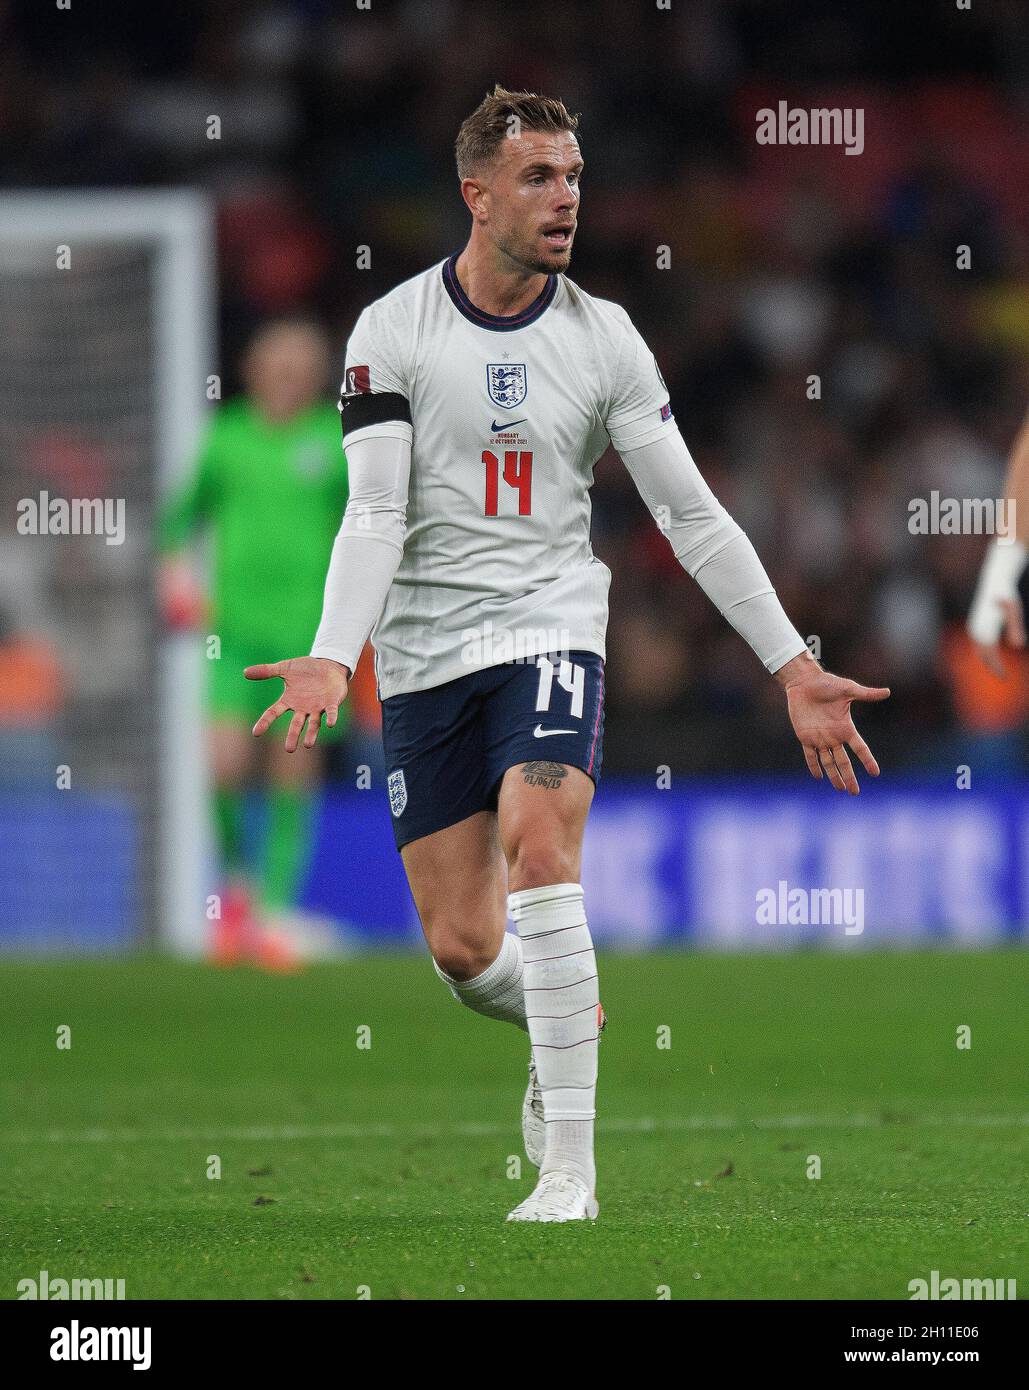 England v Hungary - FIFA World Cup 2022 - Wembley Stadium Englands Jordan Henderson during the World Cup Qualifier at Wembley